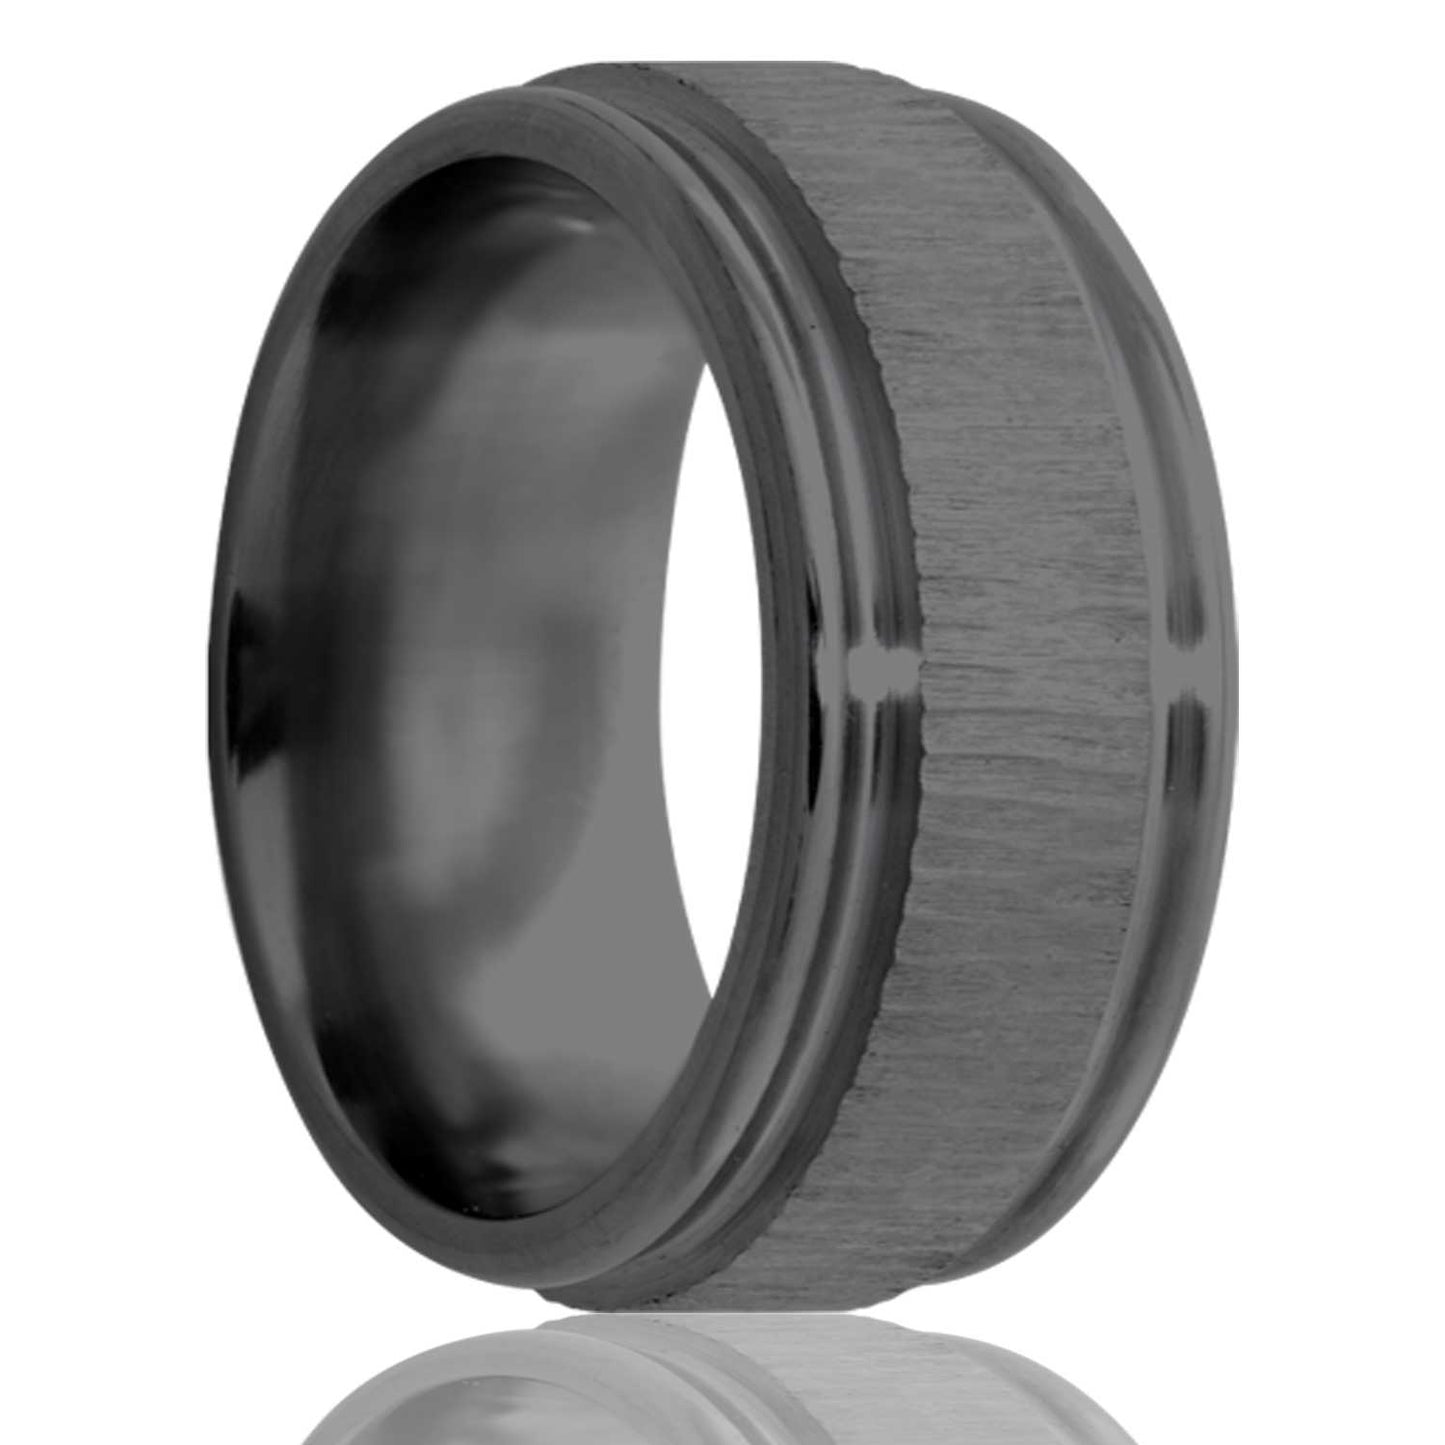 A treebark grooved zirconium wedding band with stepped edges displayed on a neutral white background.